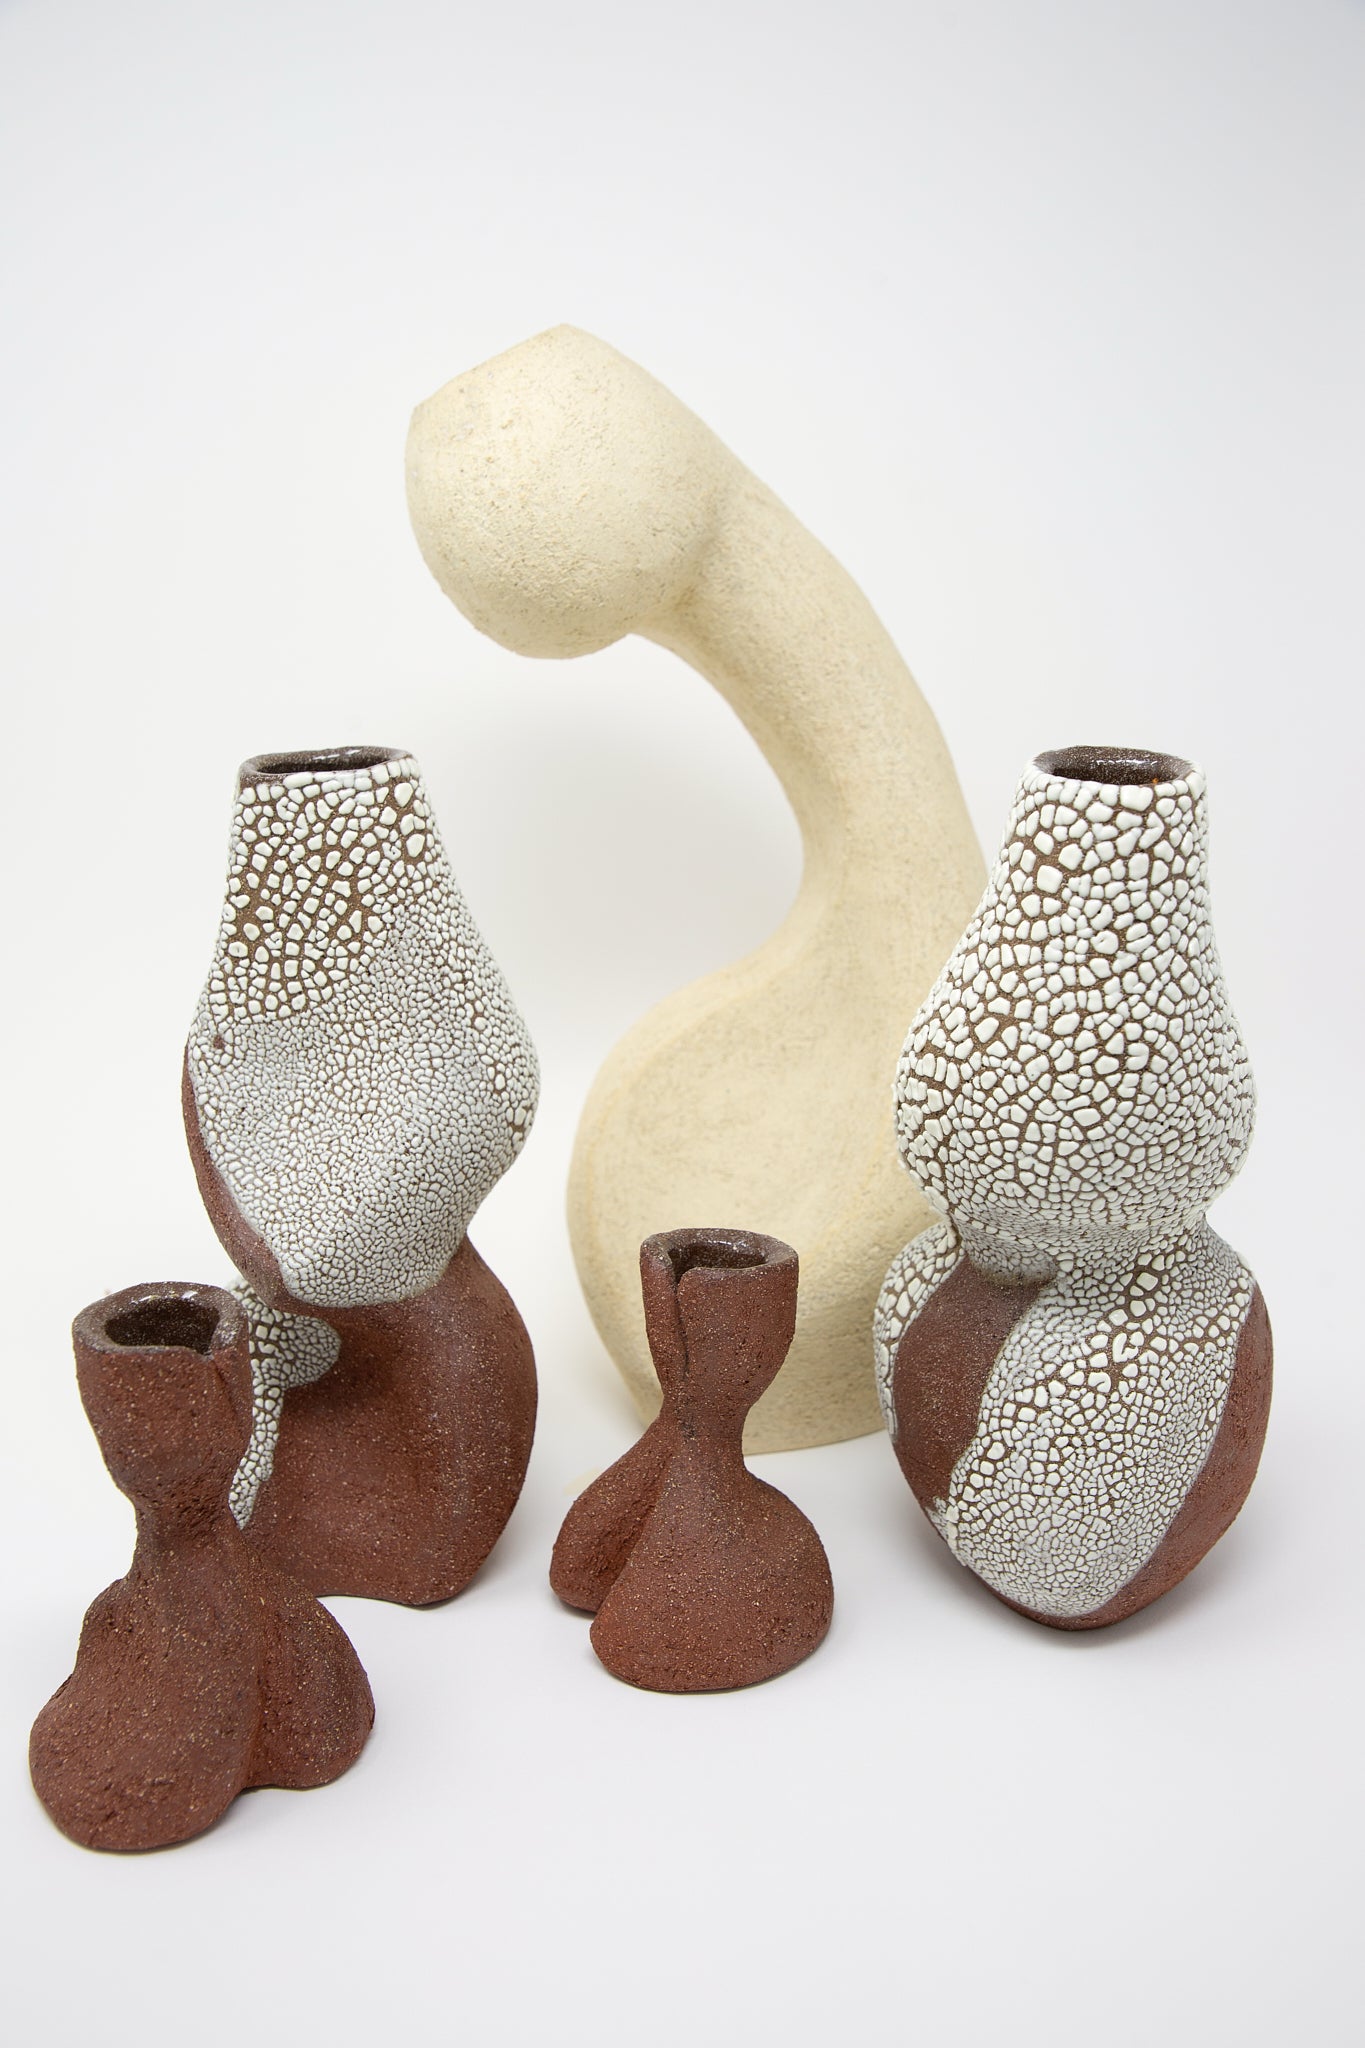 A collection of Lost Quarry's Hand Built Vessel No. 000743 Bud Vases, crackle-glazed terracotta ceramic vessels, displayed on a white surface.